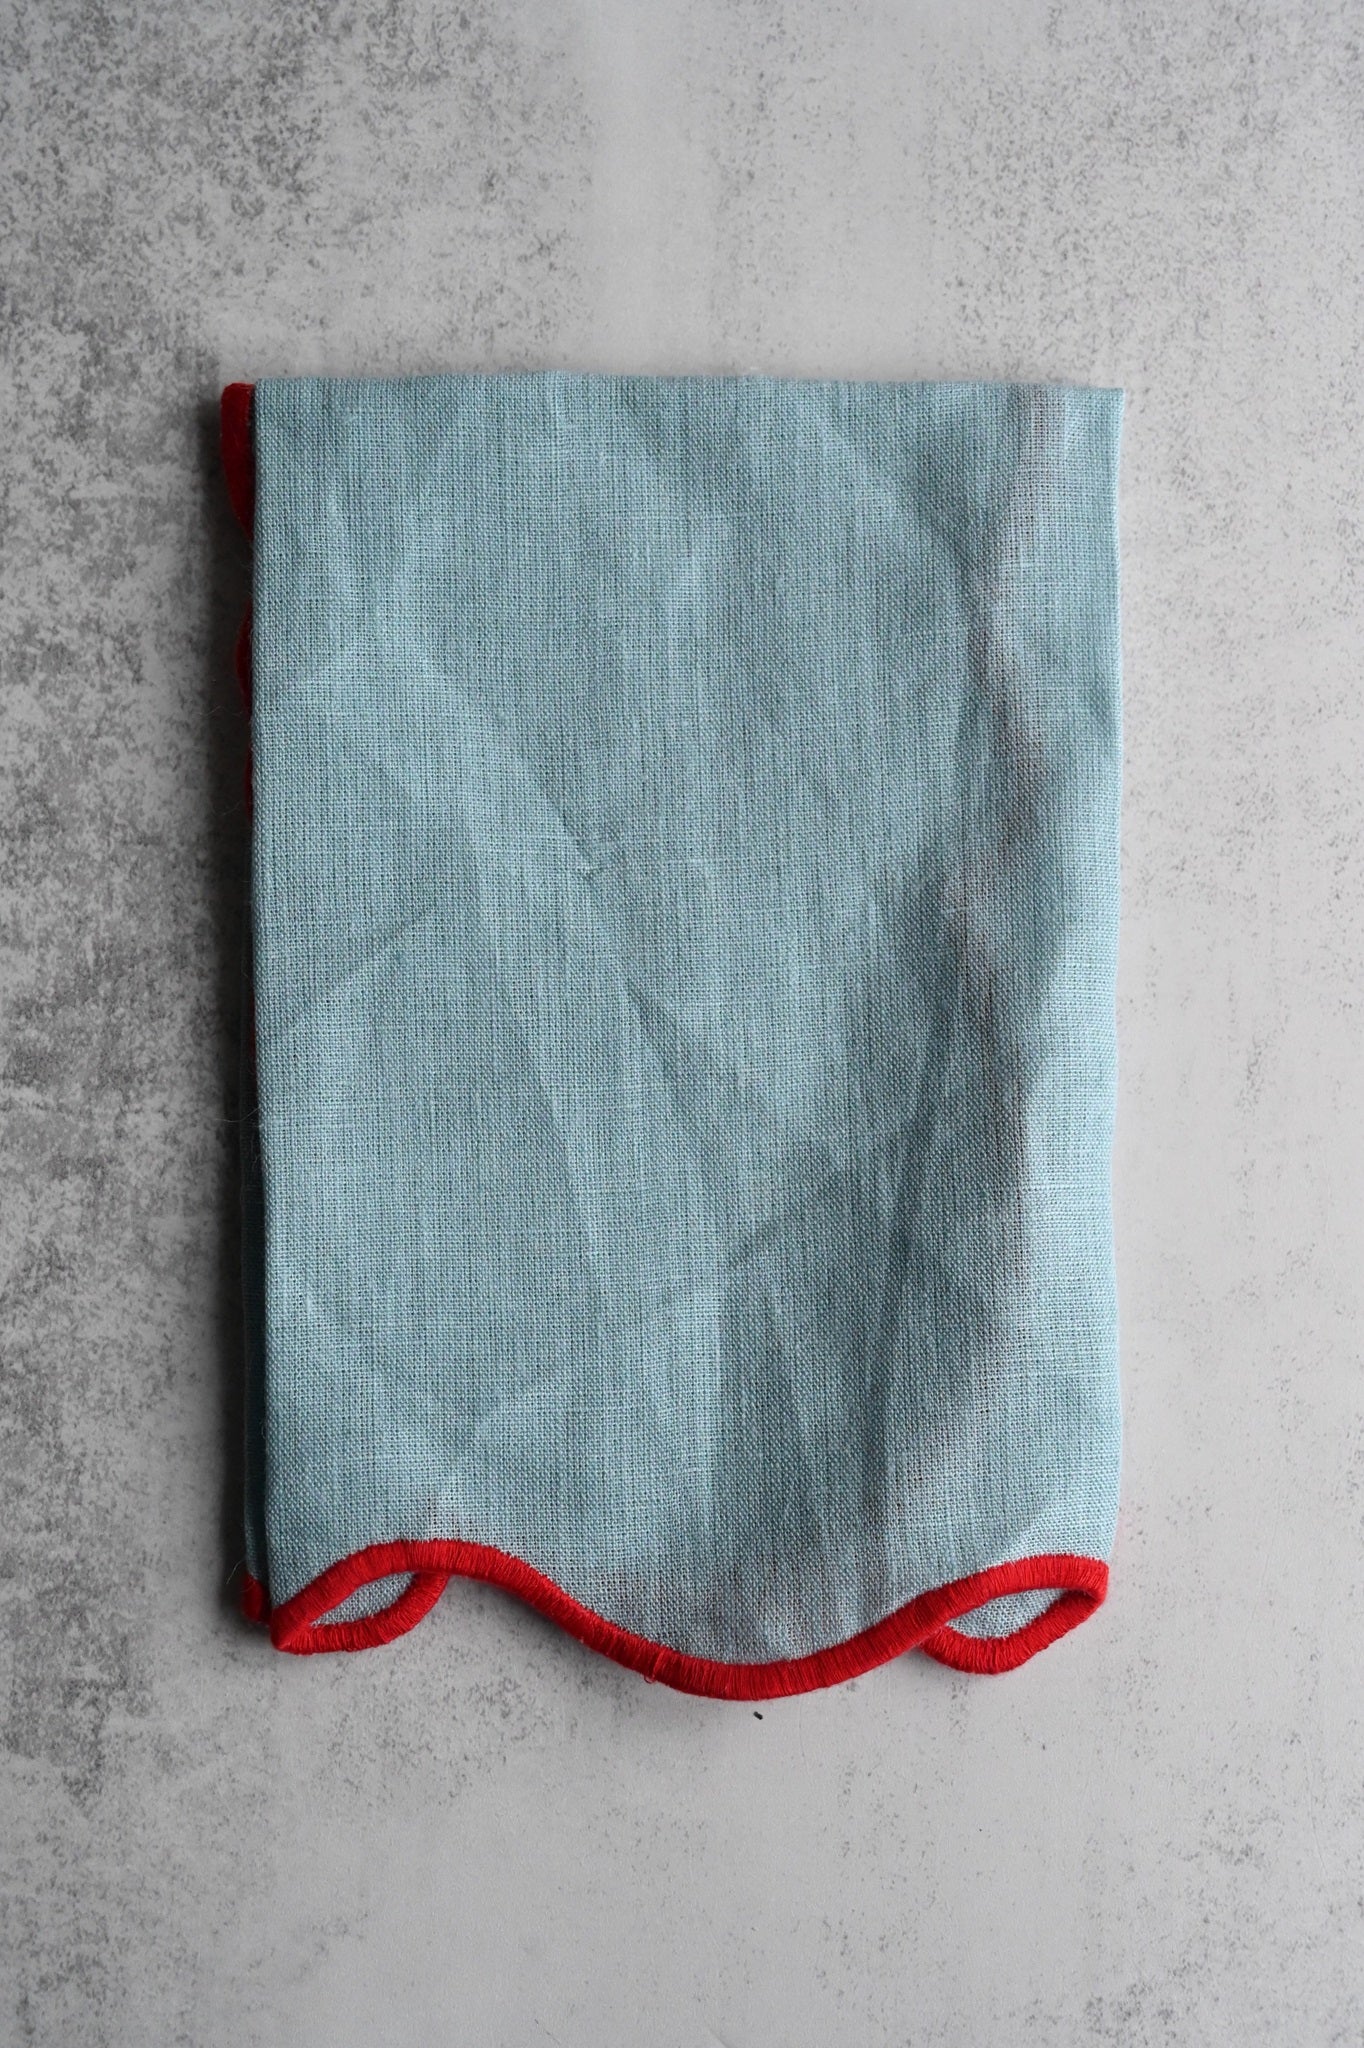 Sky Blue Scalloped Napkin with Red Border